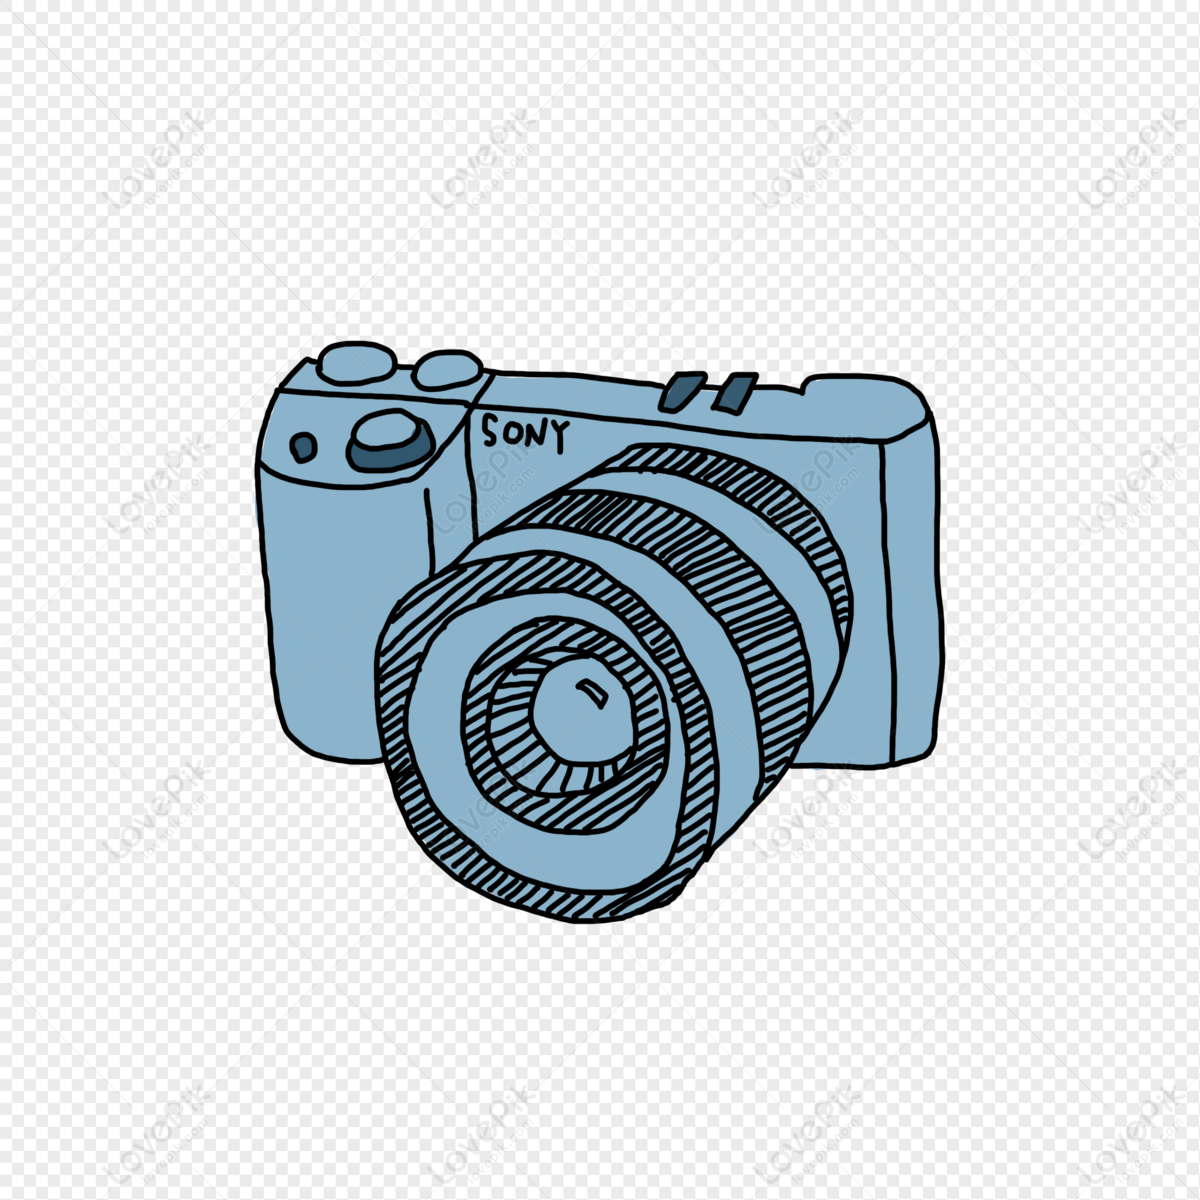 Cartoon Camera PNG Image Free Download And Clipart Image For Free Download  - Lovepik | 401344471